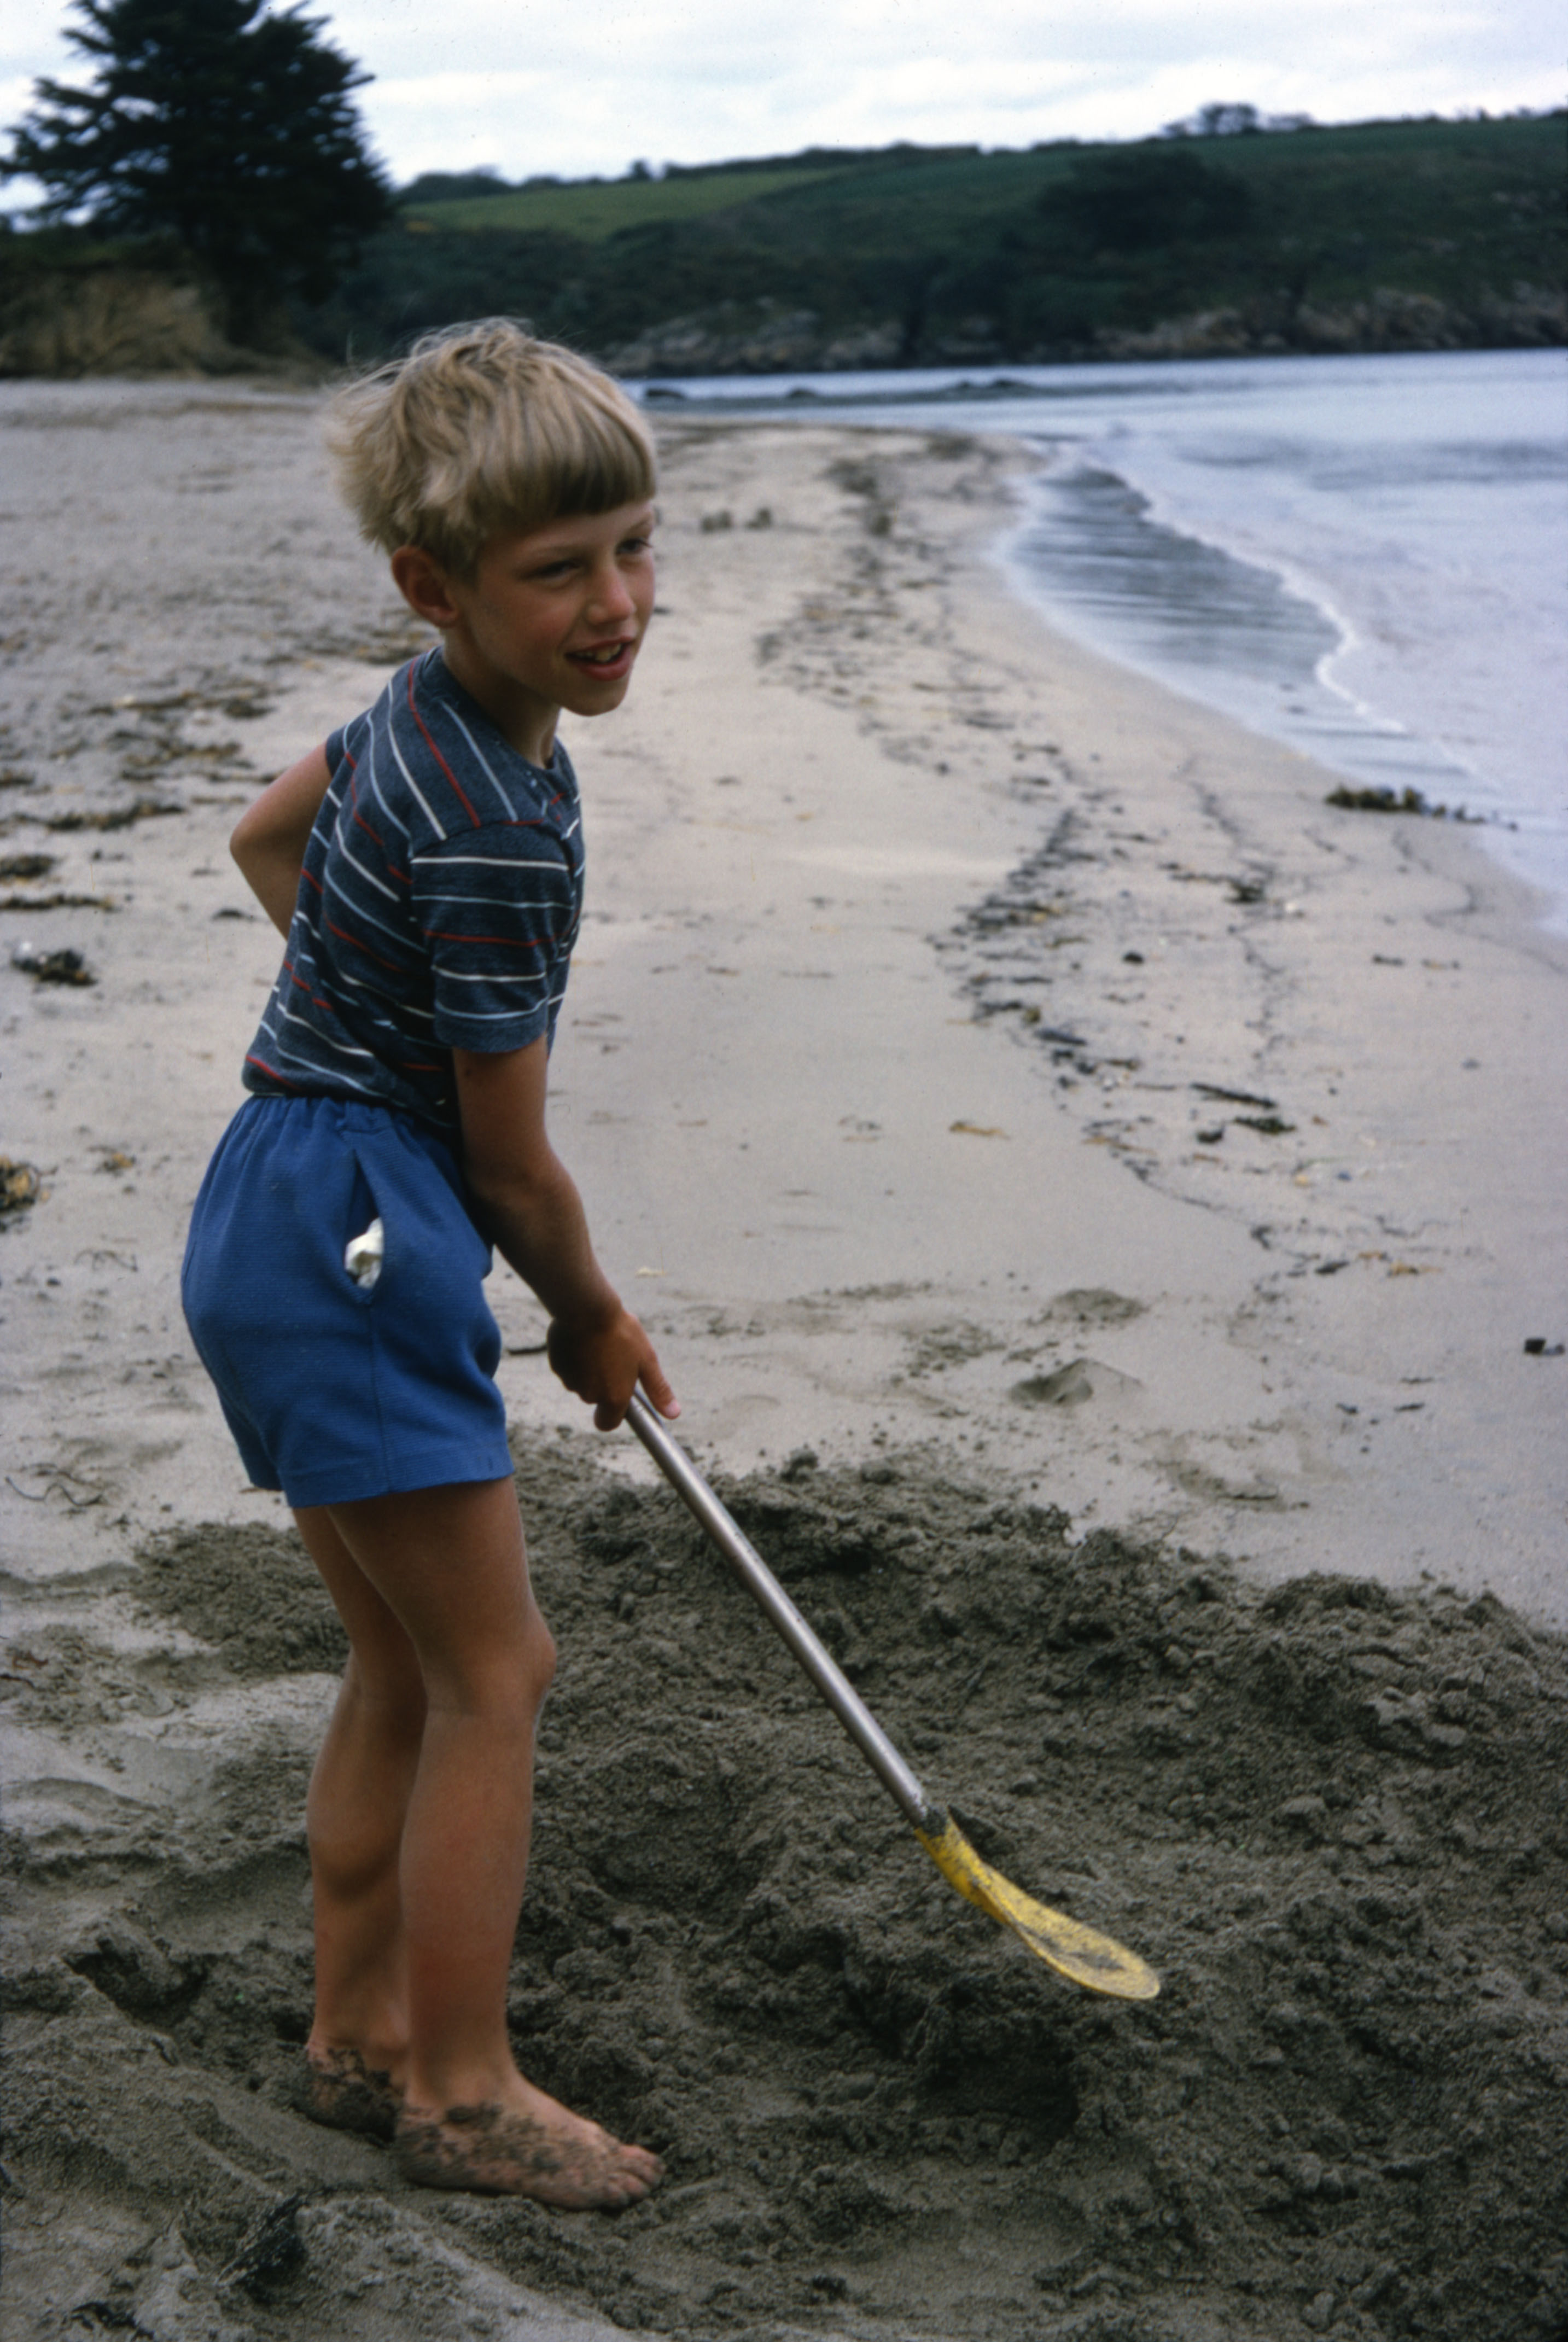 Summer 1967 Peter digging on the beach at Brittany